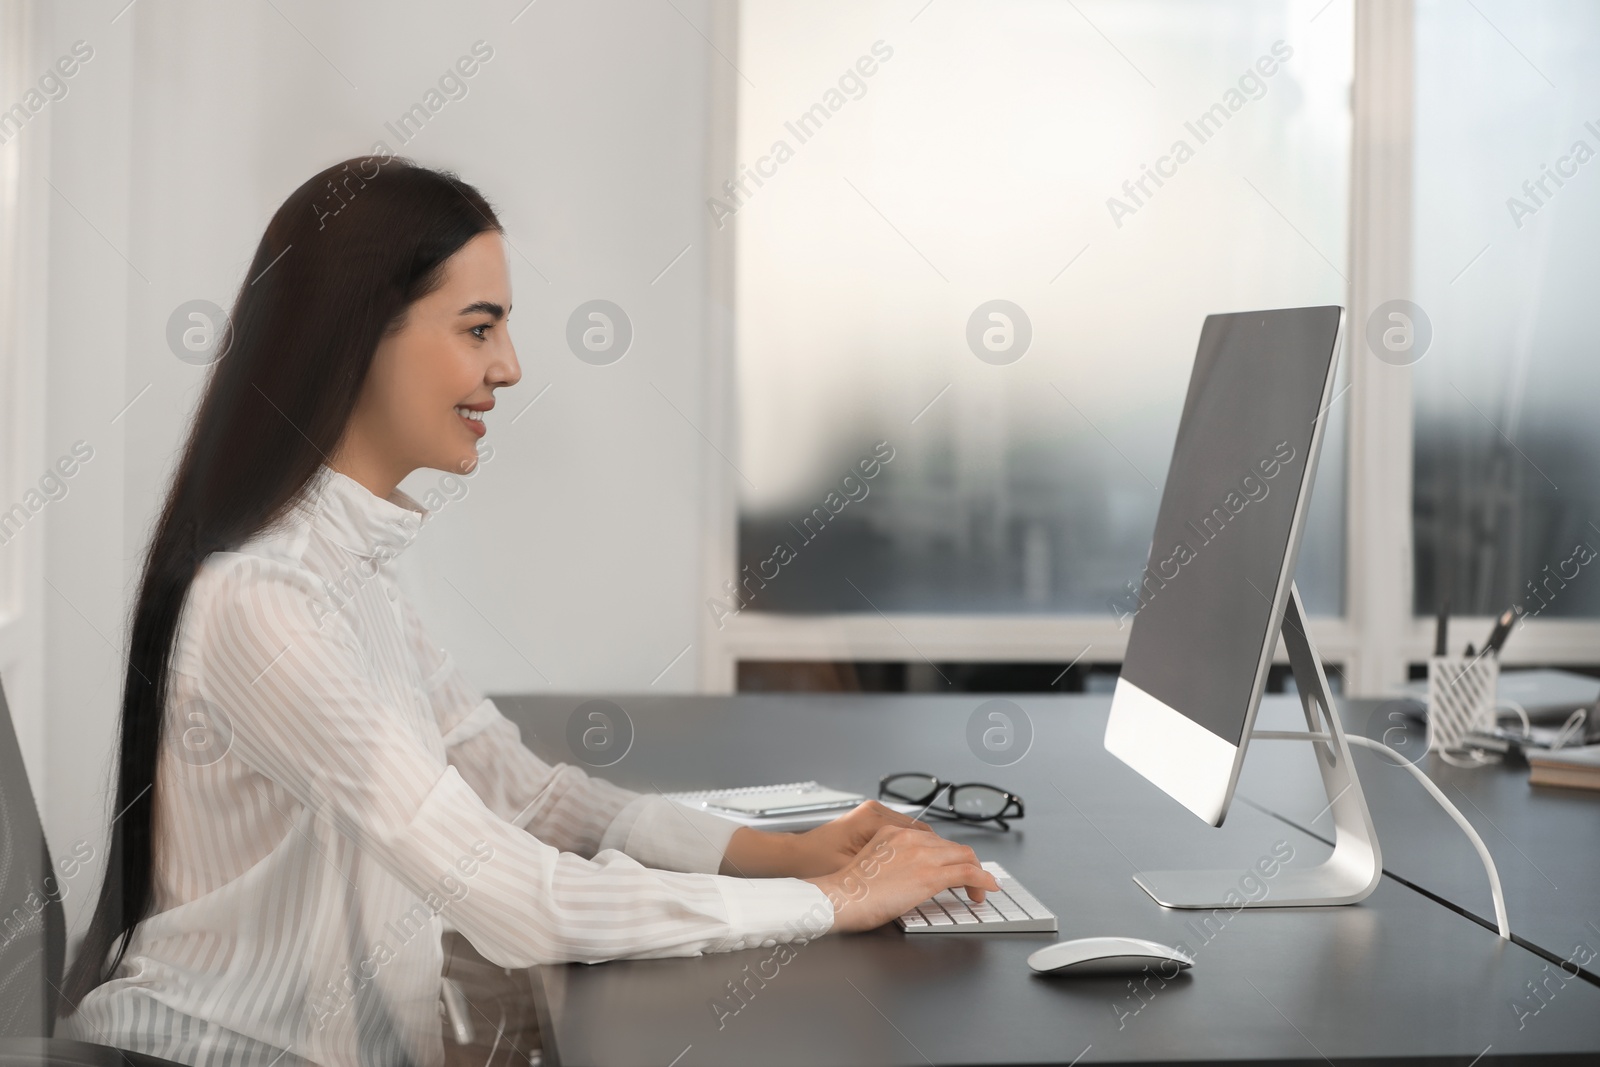 Photo of Happy woman using modern computer at black desk in office